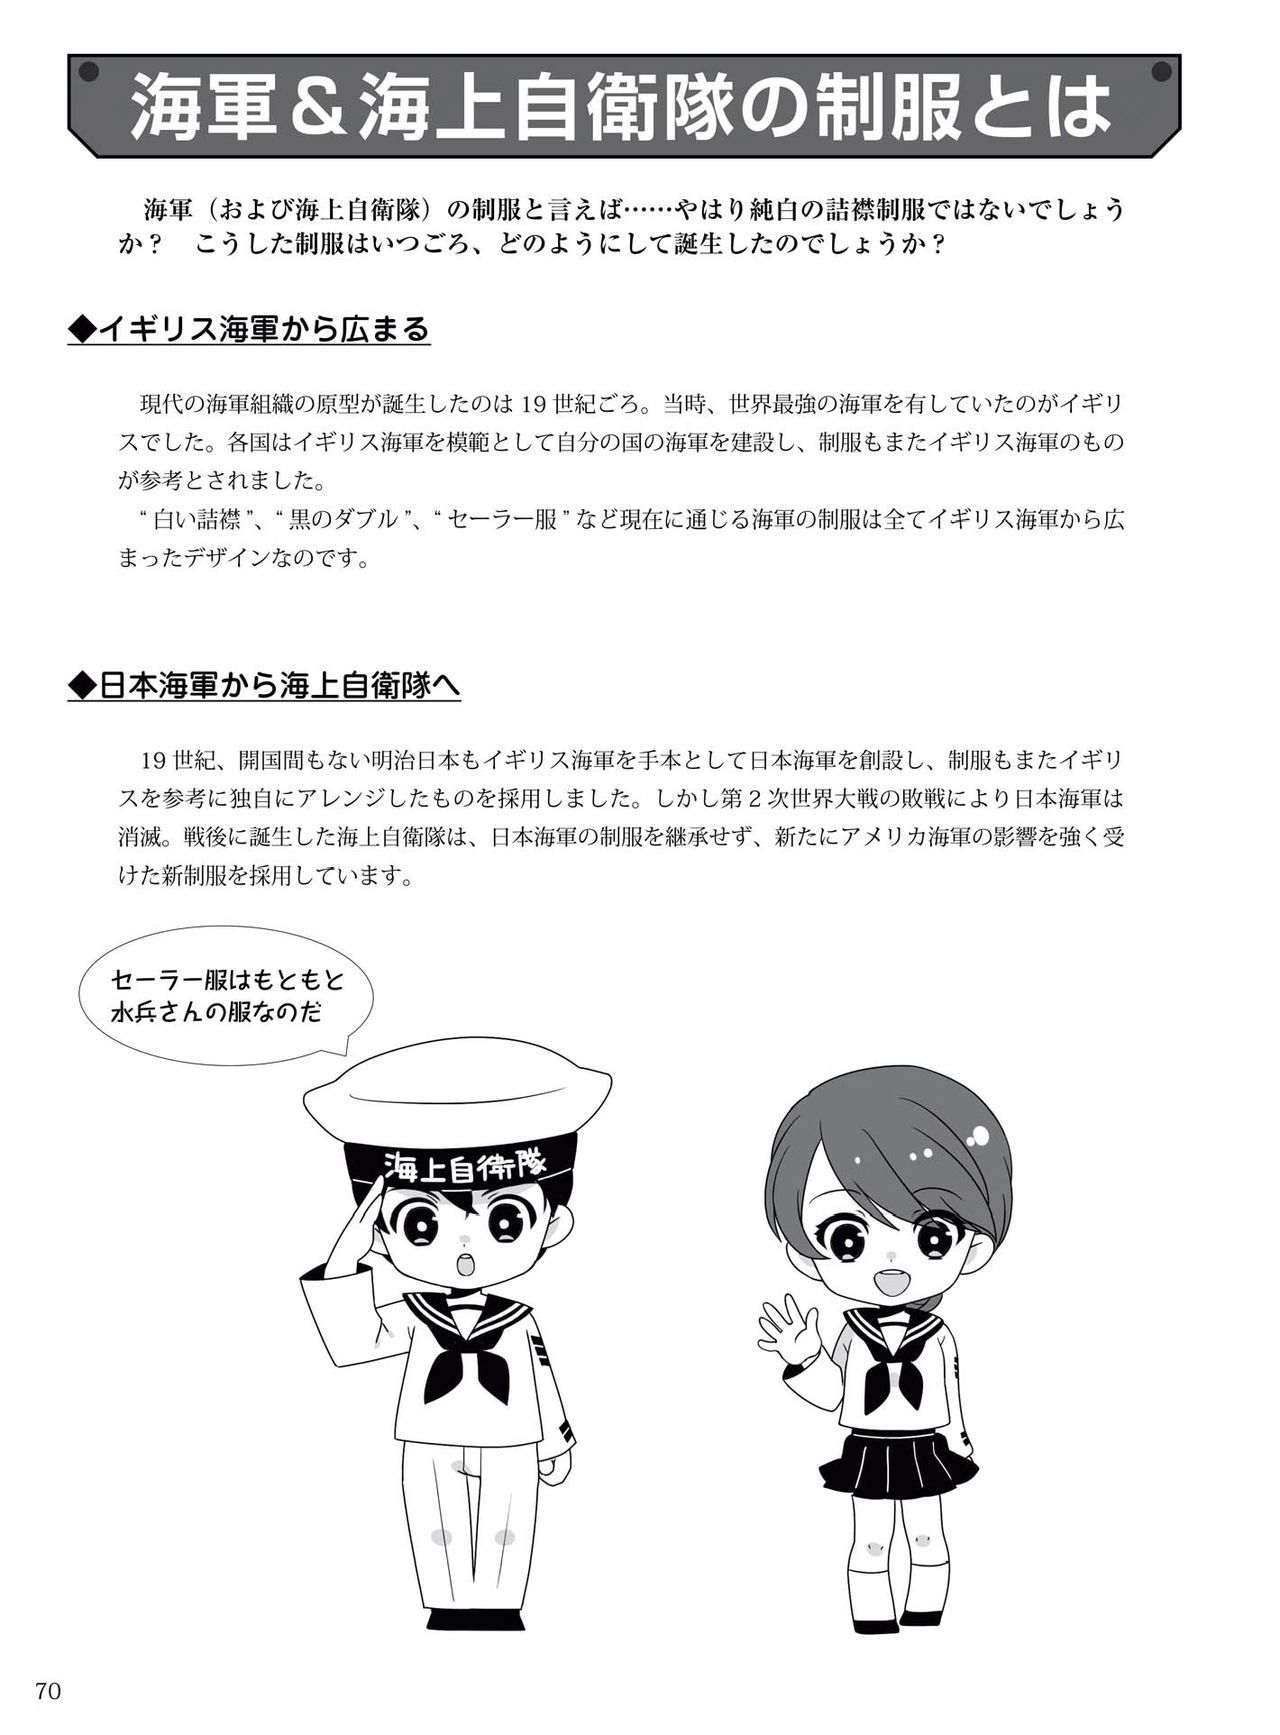 How to draw military uniforms and uniforms From Self-Defense Forces 軍服・制服の描き方 アメリカ軍・自衛隊の制服から戦闘服まで 73